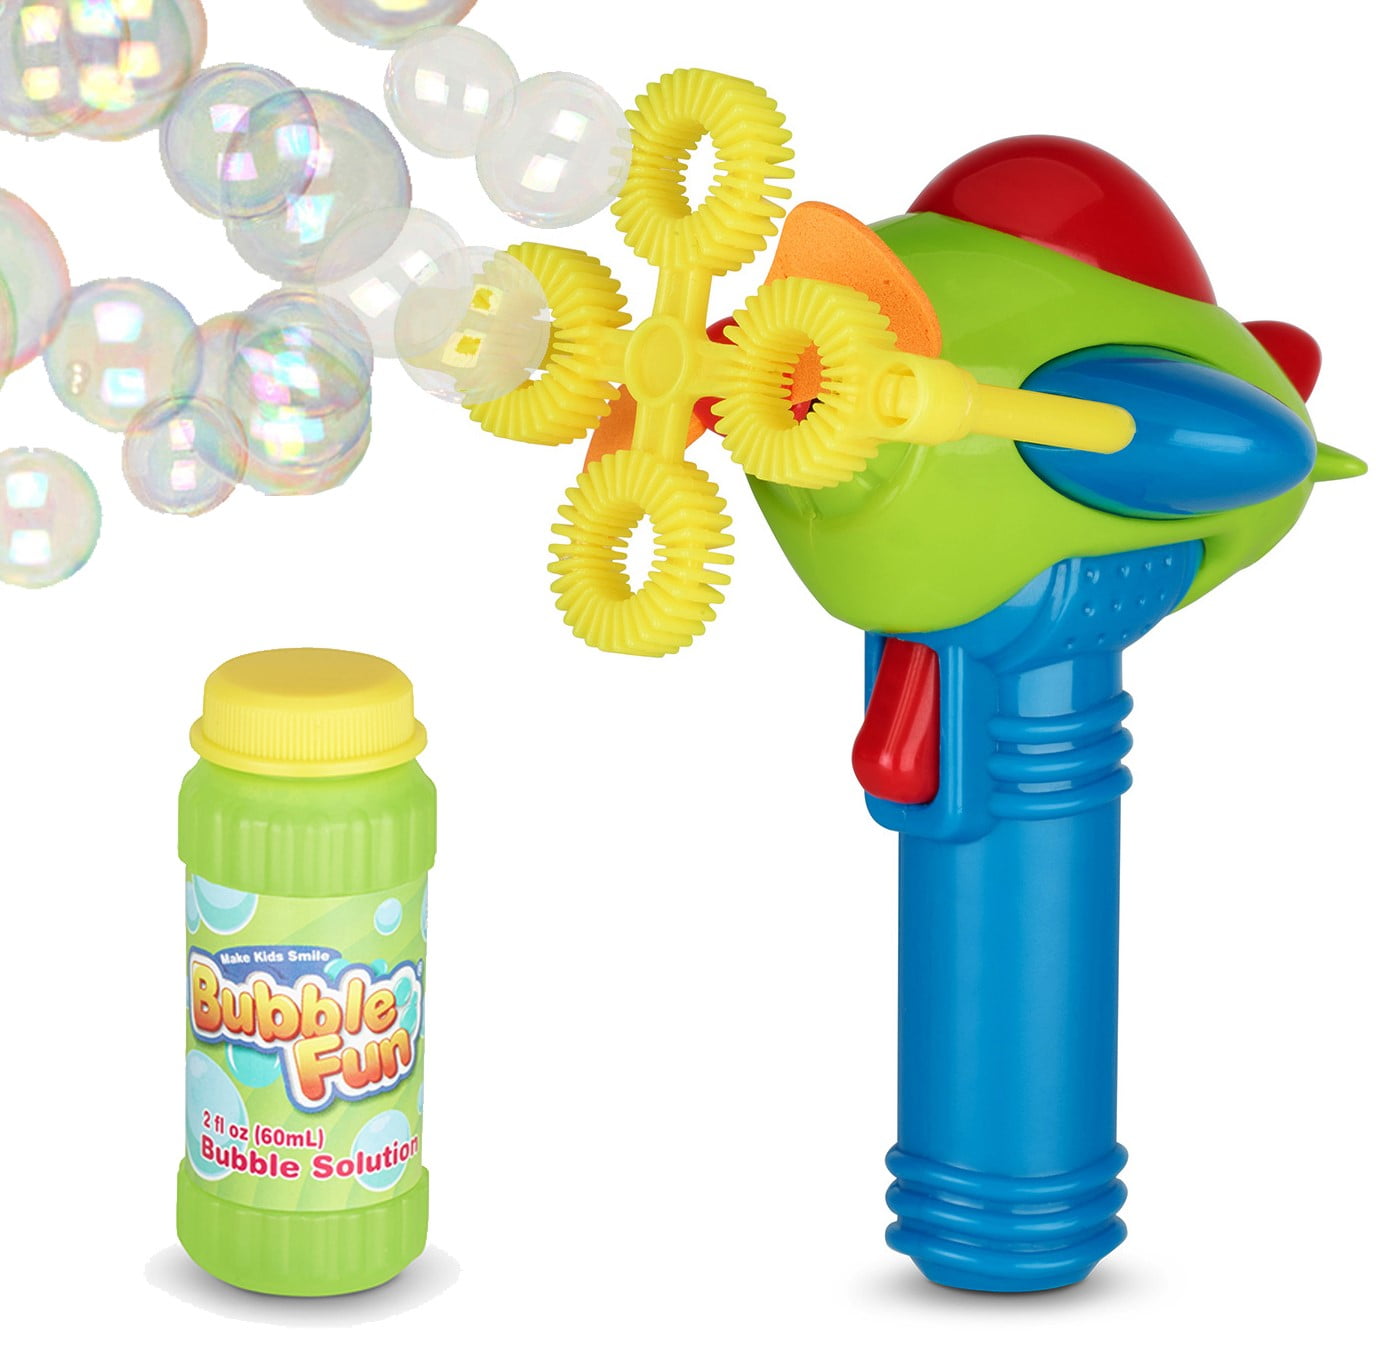 Blitz Twin Mini Bubbles Blowing Toy with Carry Clip (1 Pack in Pairs) for  Kids, Portable Bubble Blower / Bubble Blaster Bubble Soap Solution Party